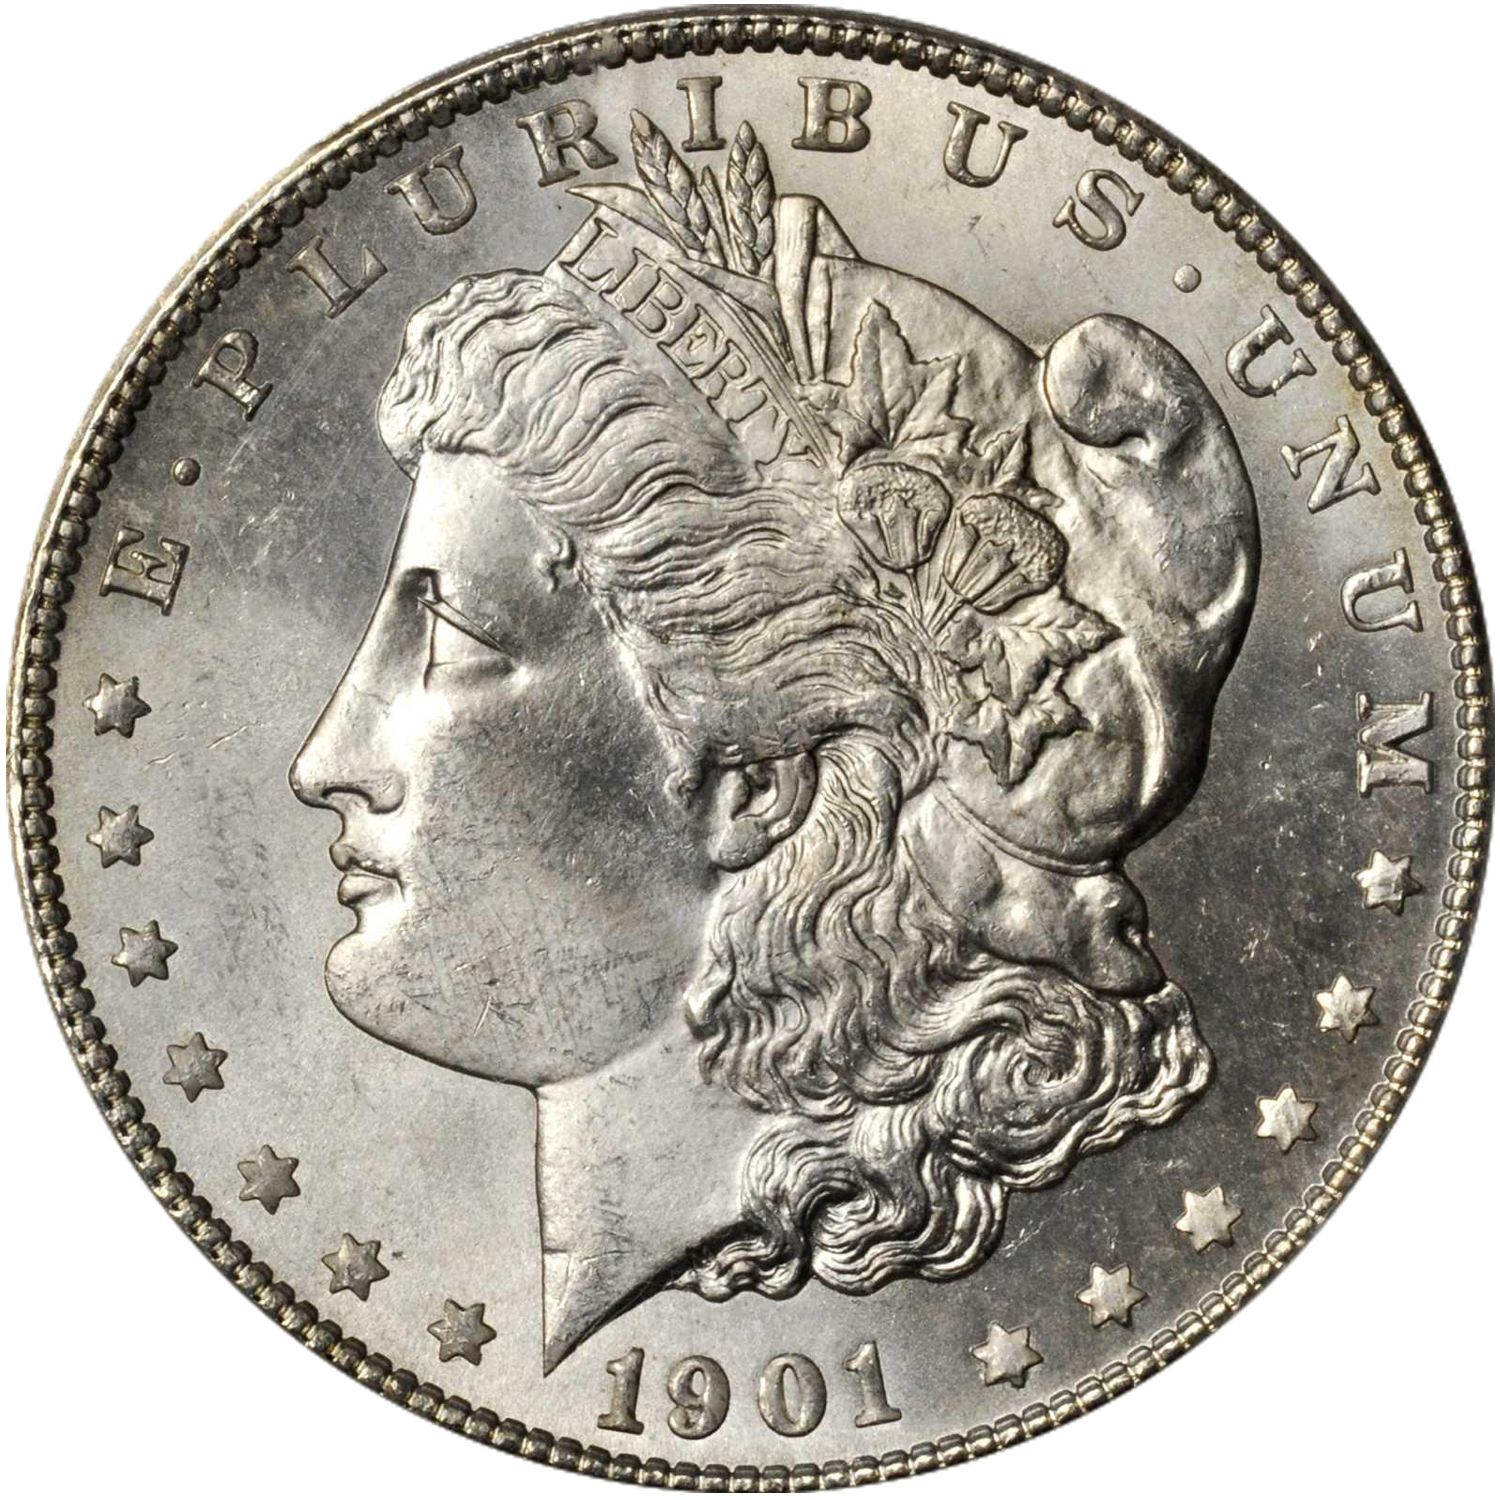 1901 s mint morgan dollar price guide value